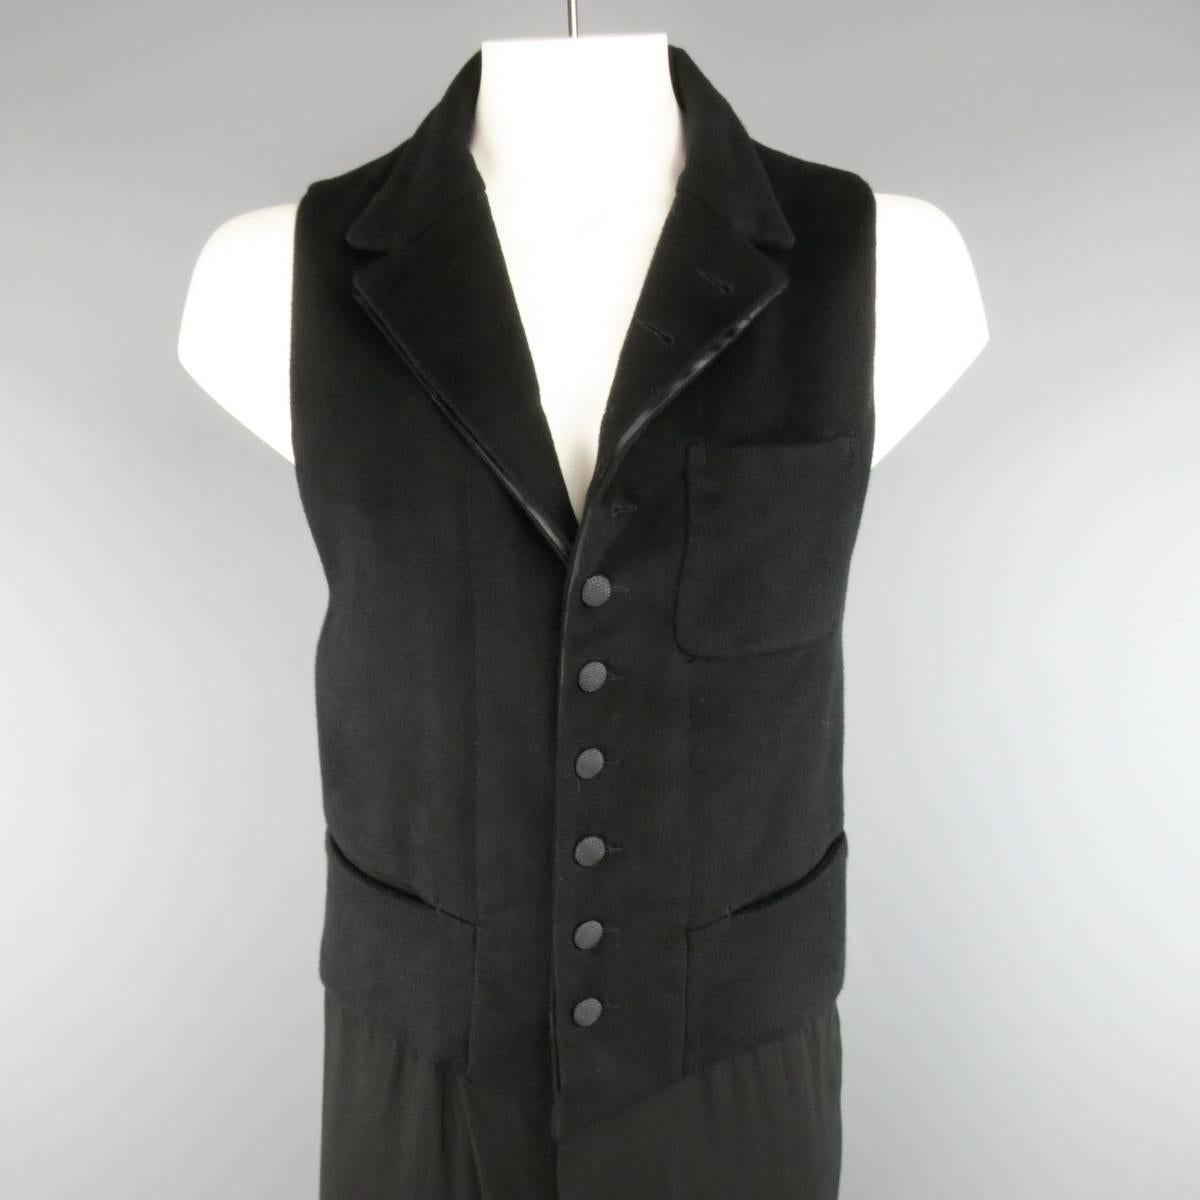 ANN DEMEULEMEESTER vest comes in a fuzzy flannel fabric and features a textured button up front with pointed notch lapel and extended flowy rayon viscose layer. Made in Tunisia.
 
Excellent Pre-Owned Condition.
Marked: L
 
Measurements:
 
Shoulder: